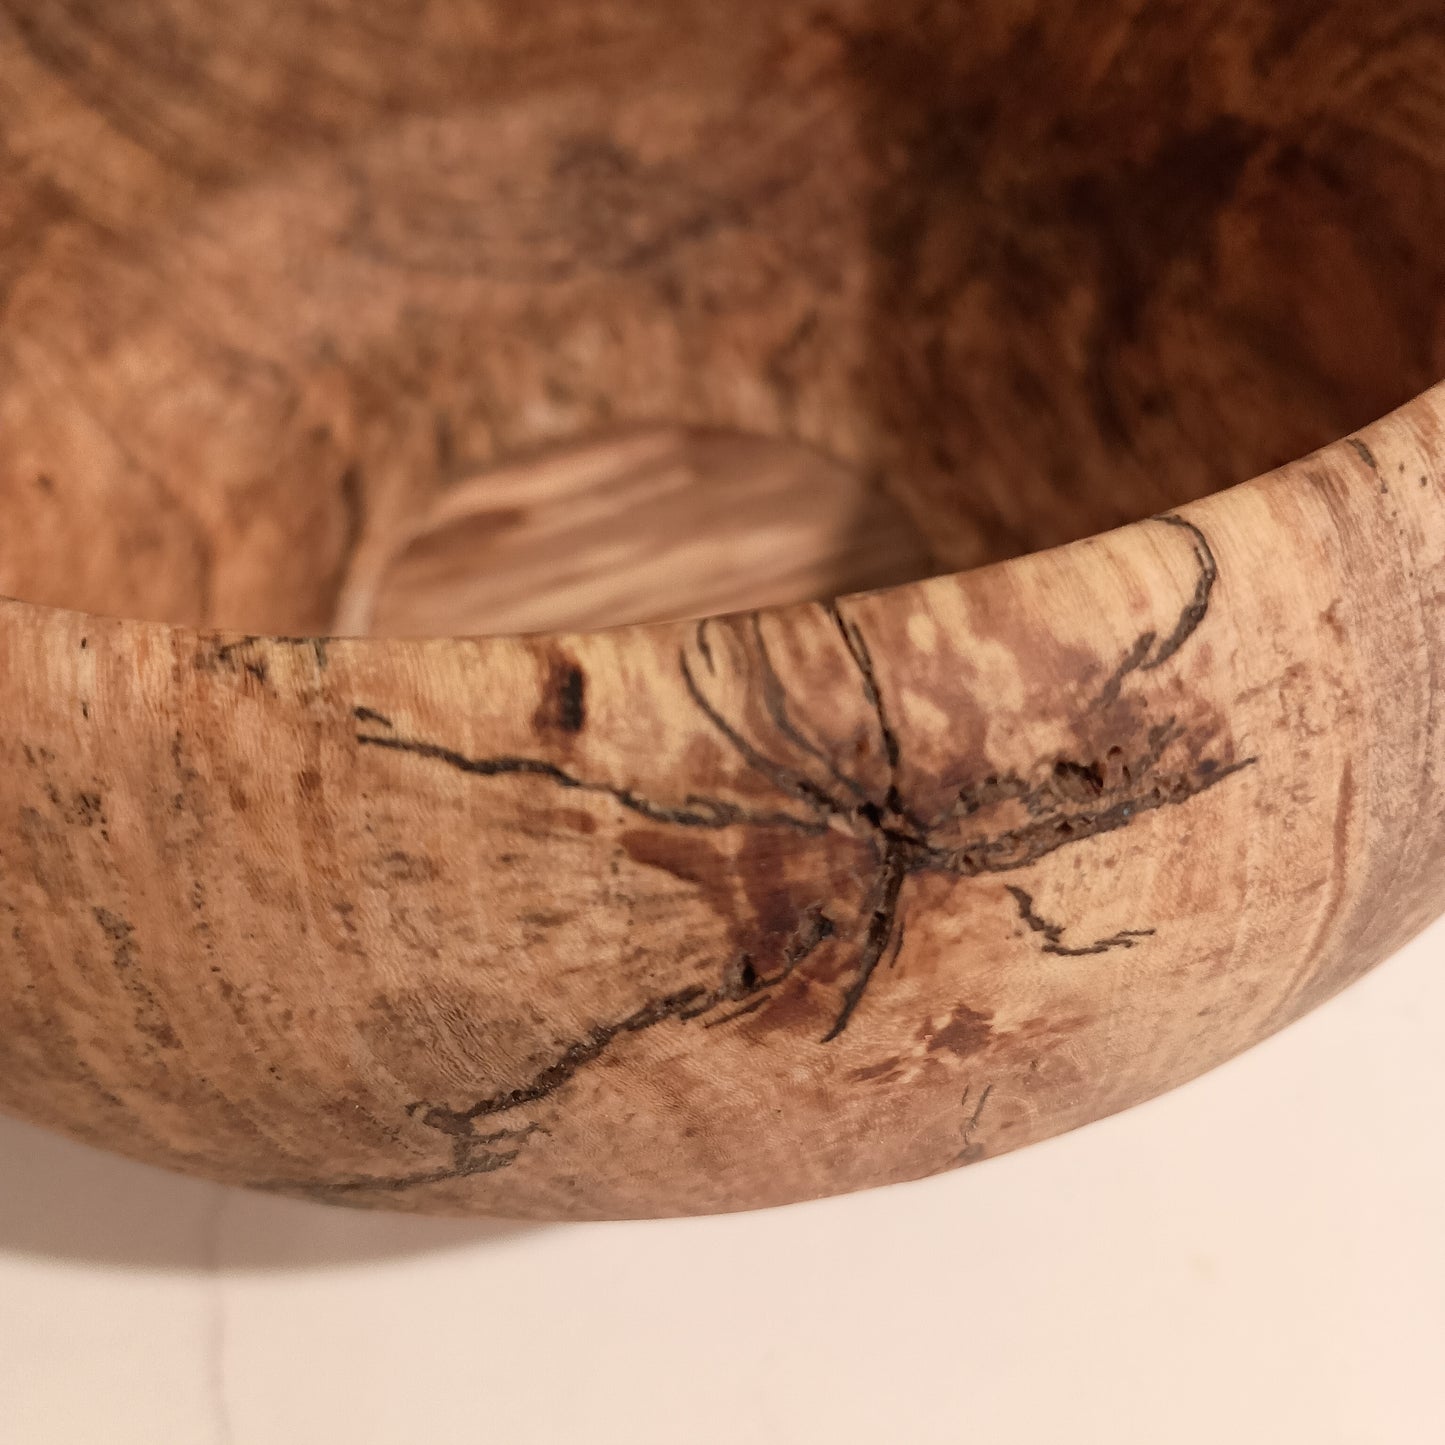 Spalted Pecan Bowl with Bradford Pear Bottom Insert, 7" x 3.25"